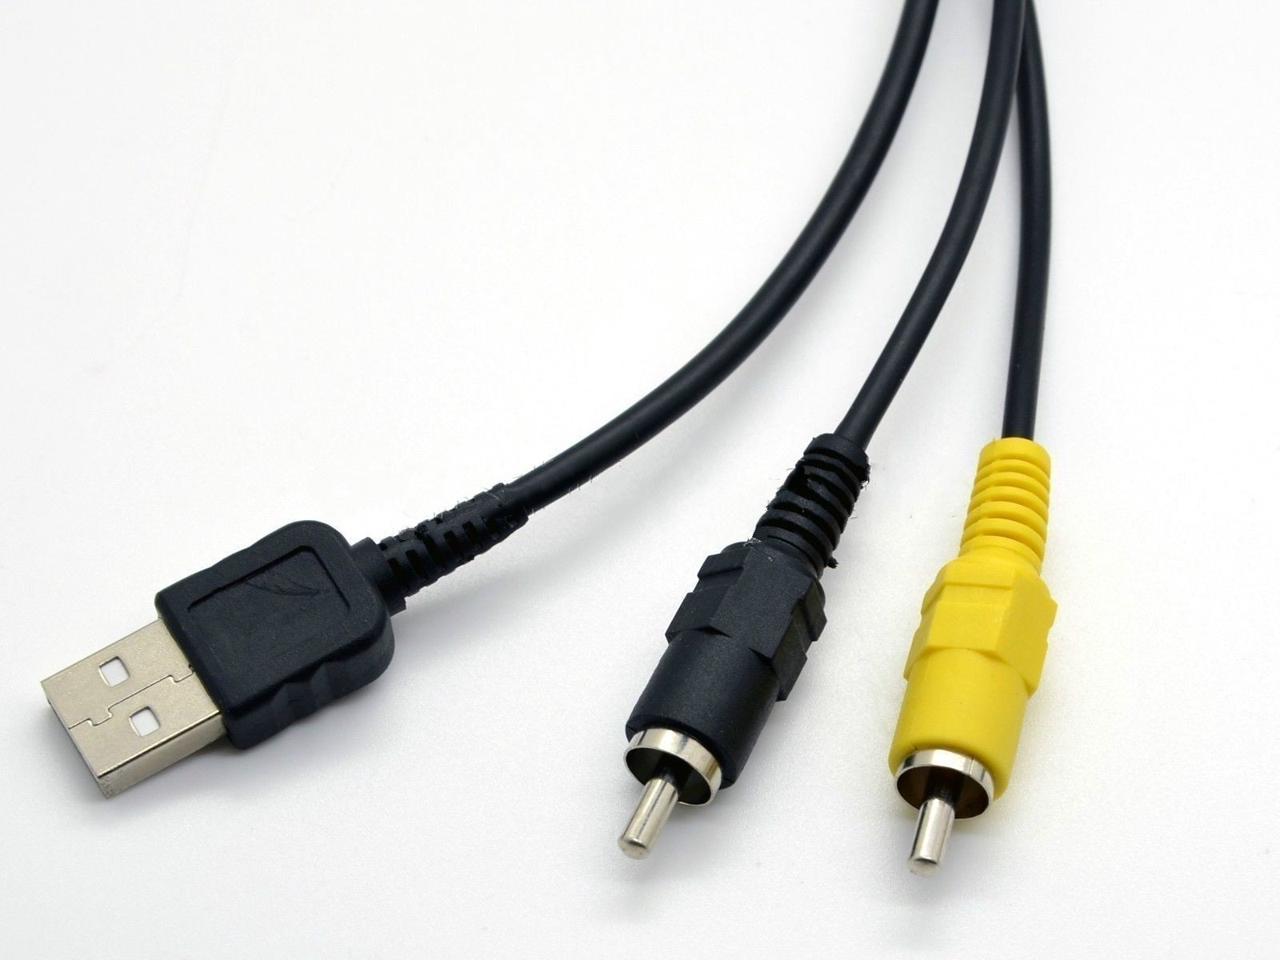 SONY  DSC-W35,DSC-W35/S CAMERA USB DATA SYNC CABLE LEAD FOR PC AND MAC 